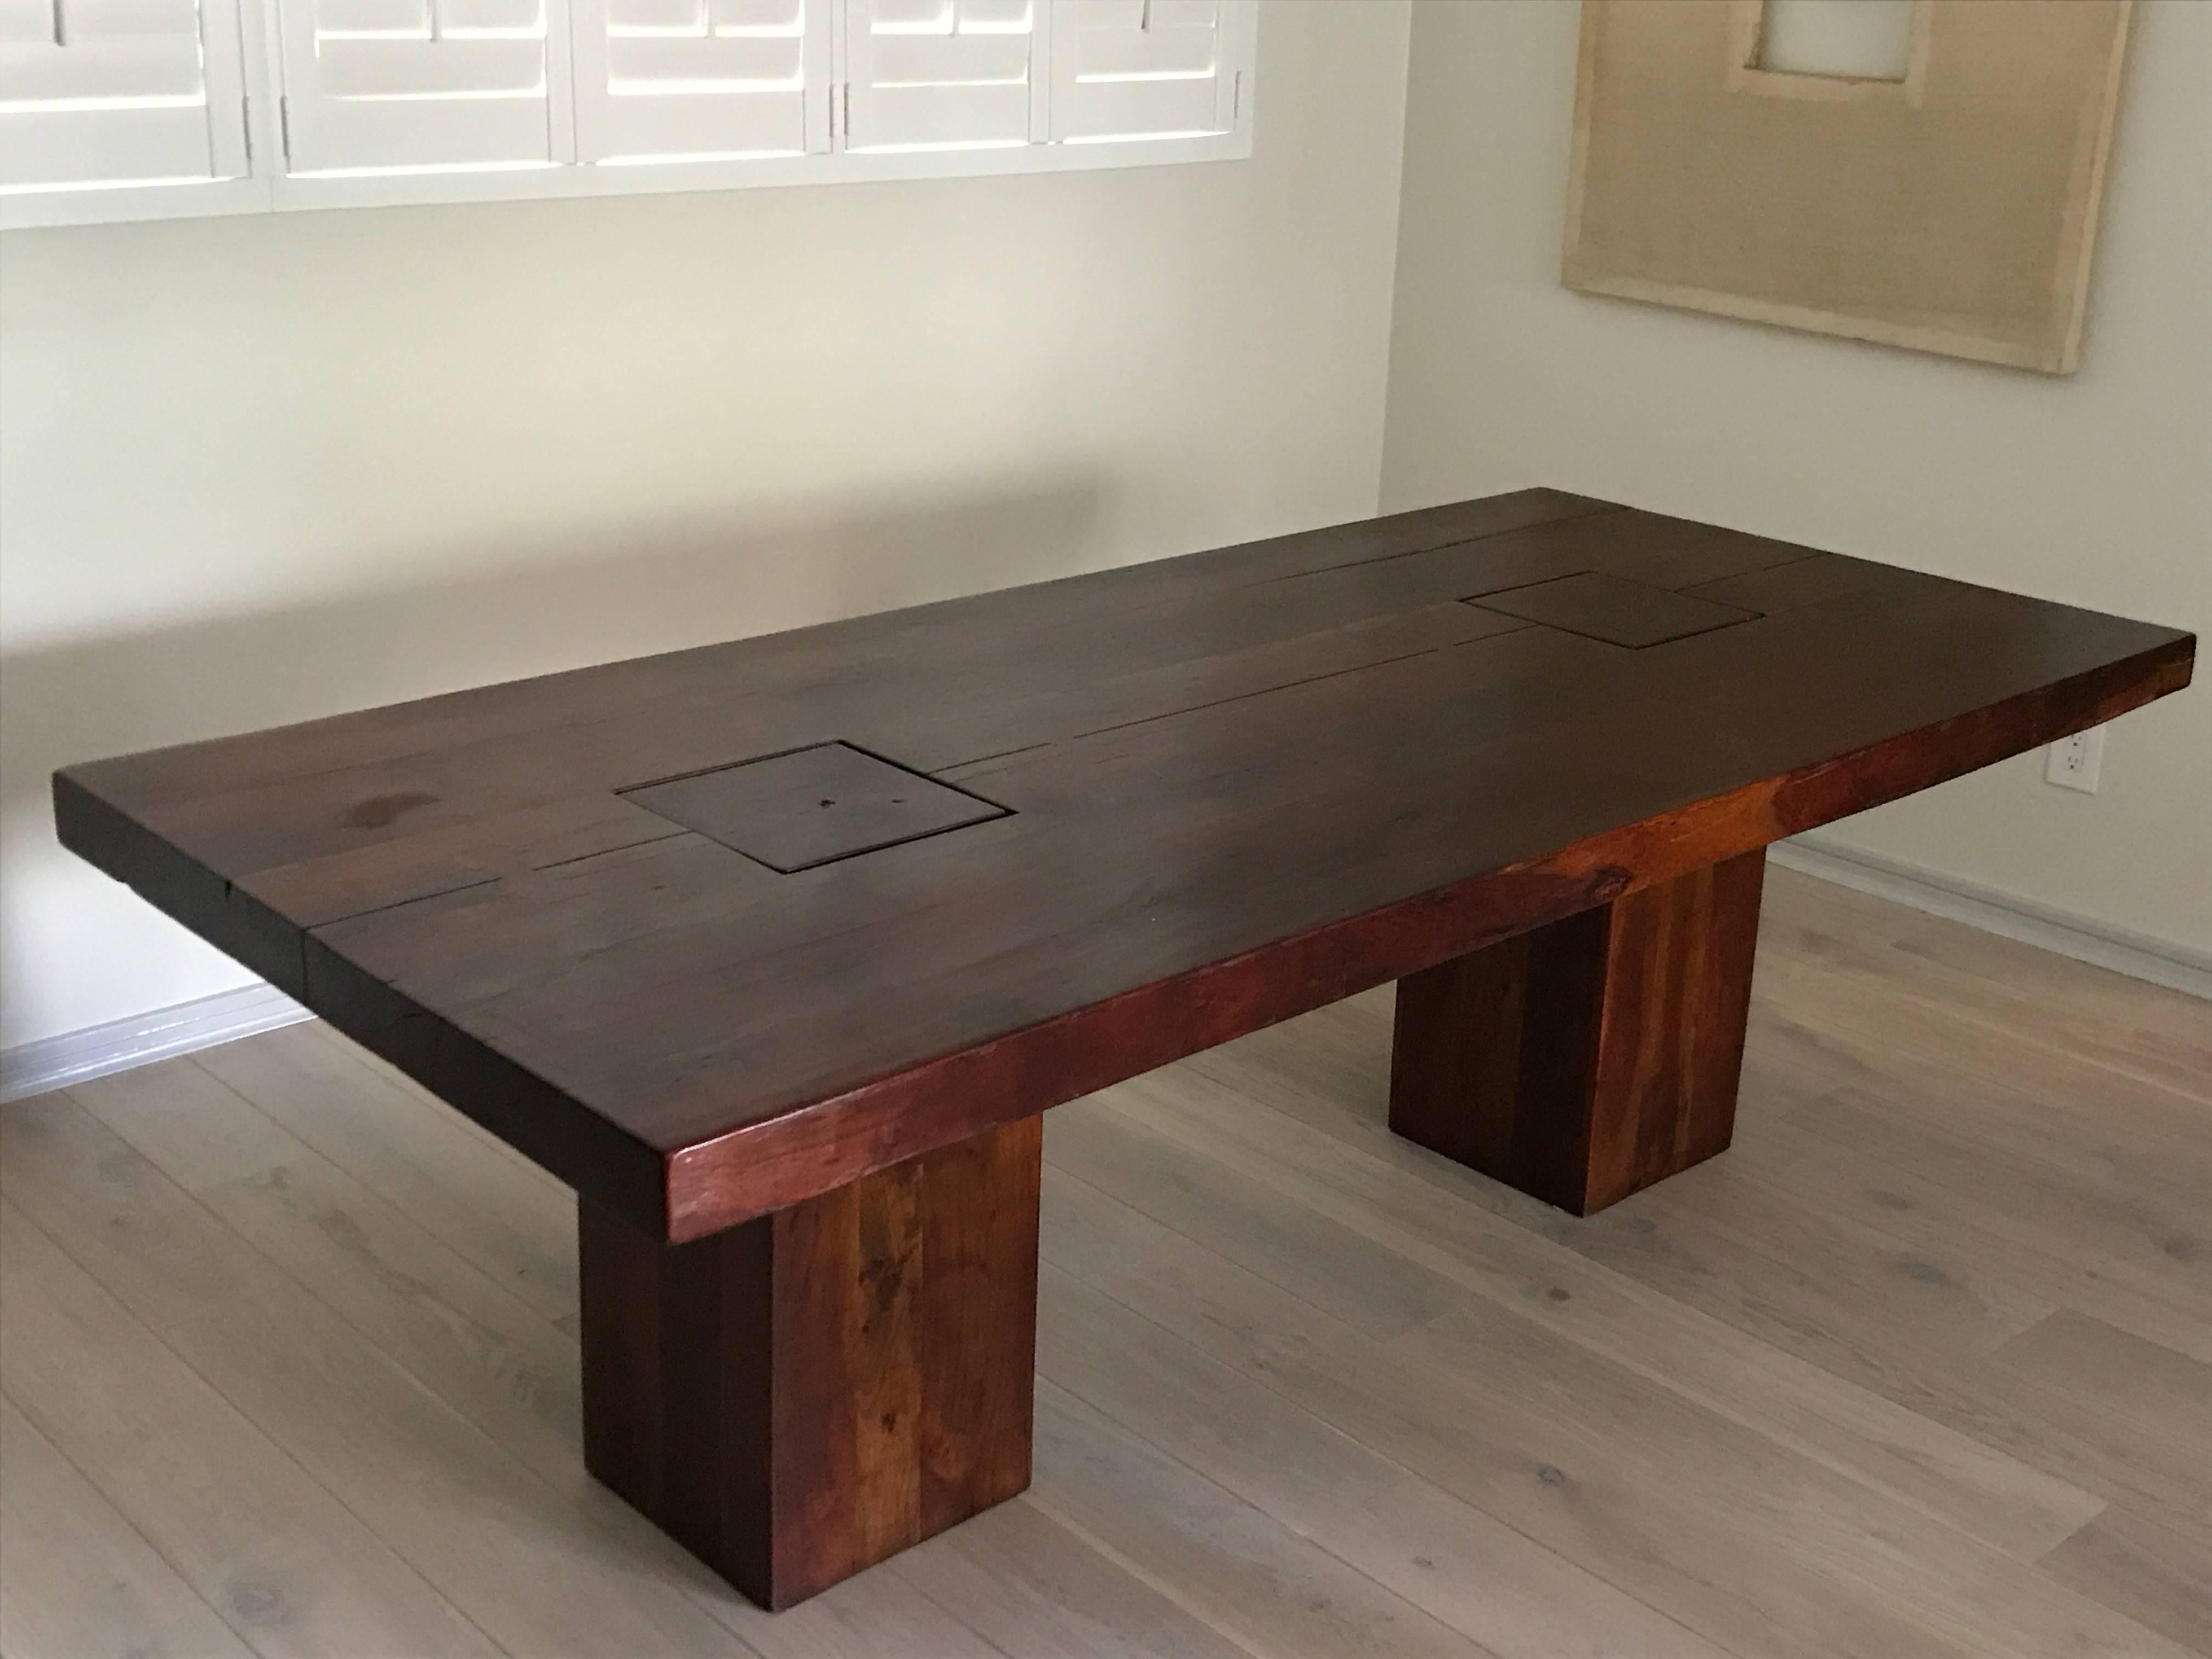 A celebration of Nature- Rough luxe Interior Design combination of rustic with modern minimalism.
1980s Vintage Gorgeous organic heavy live edge reclaimed slab wood walnut dining table- sturdy 3 “ solid wood thick top resting on two double pedestal